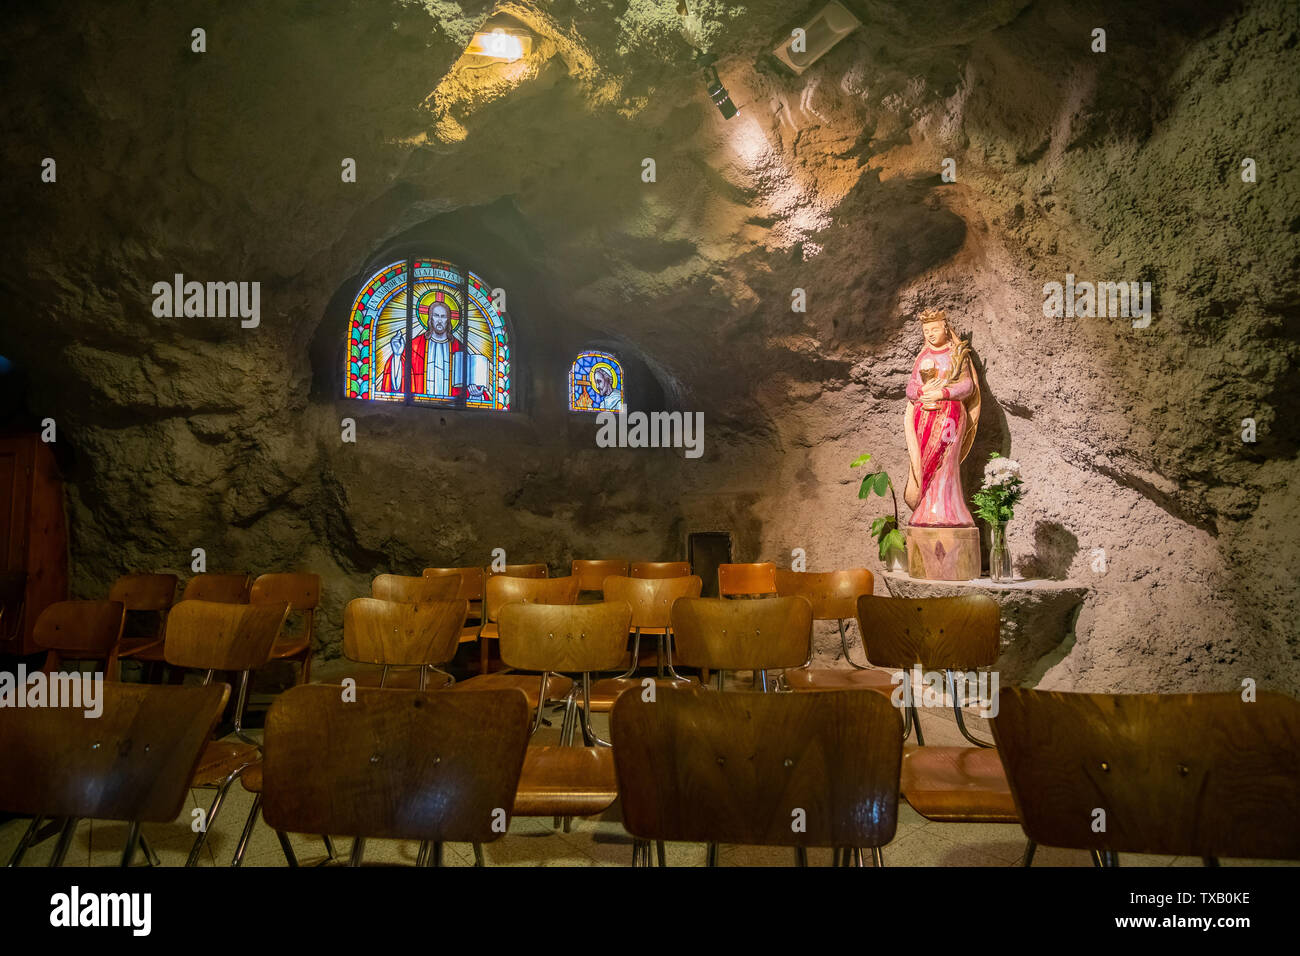 Budapest, NOV 11:  Interior view of the famous Gellért Hill Cave on NOV 11, 2018 at Budapest, Hungary Stock Photo